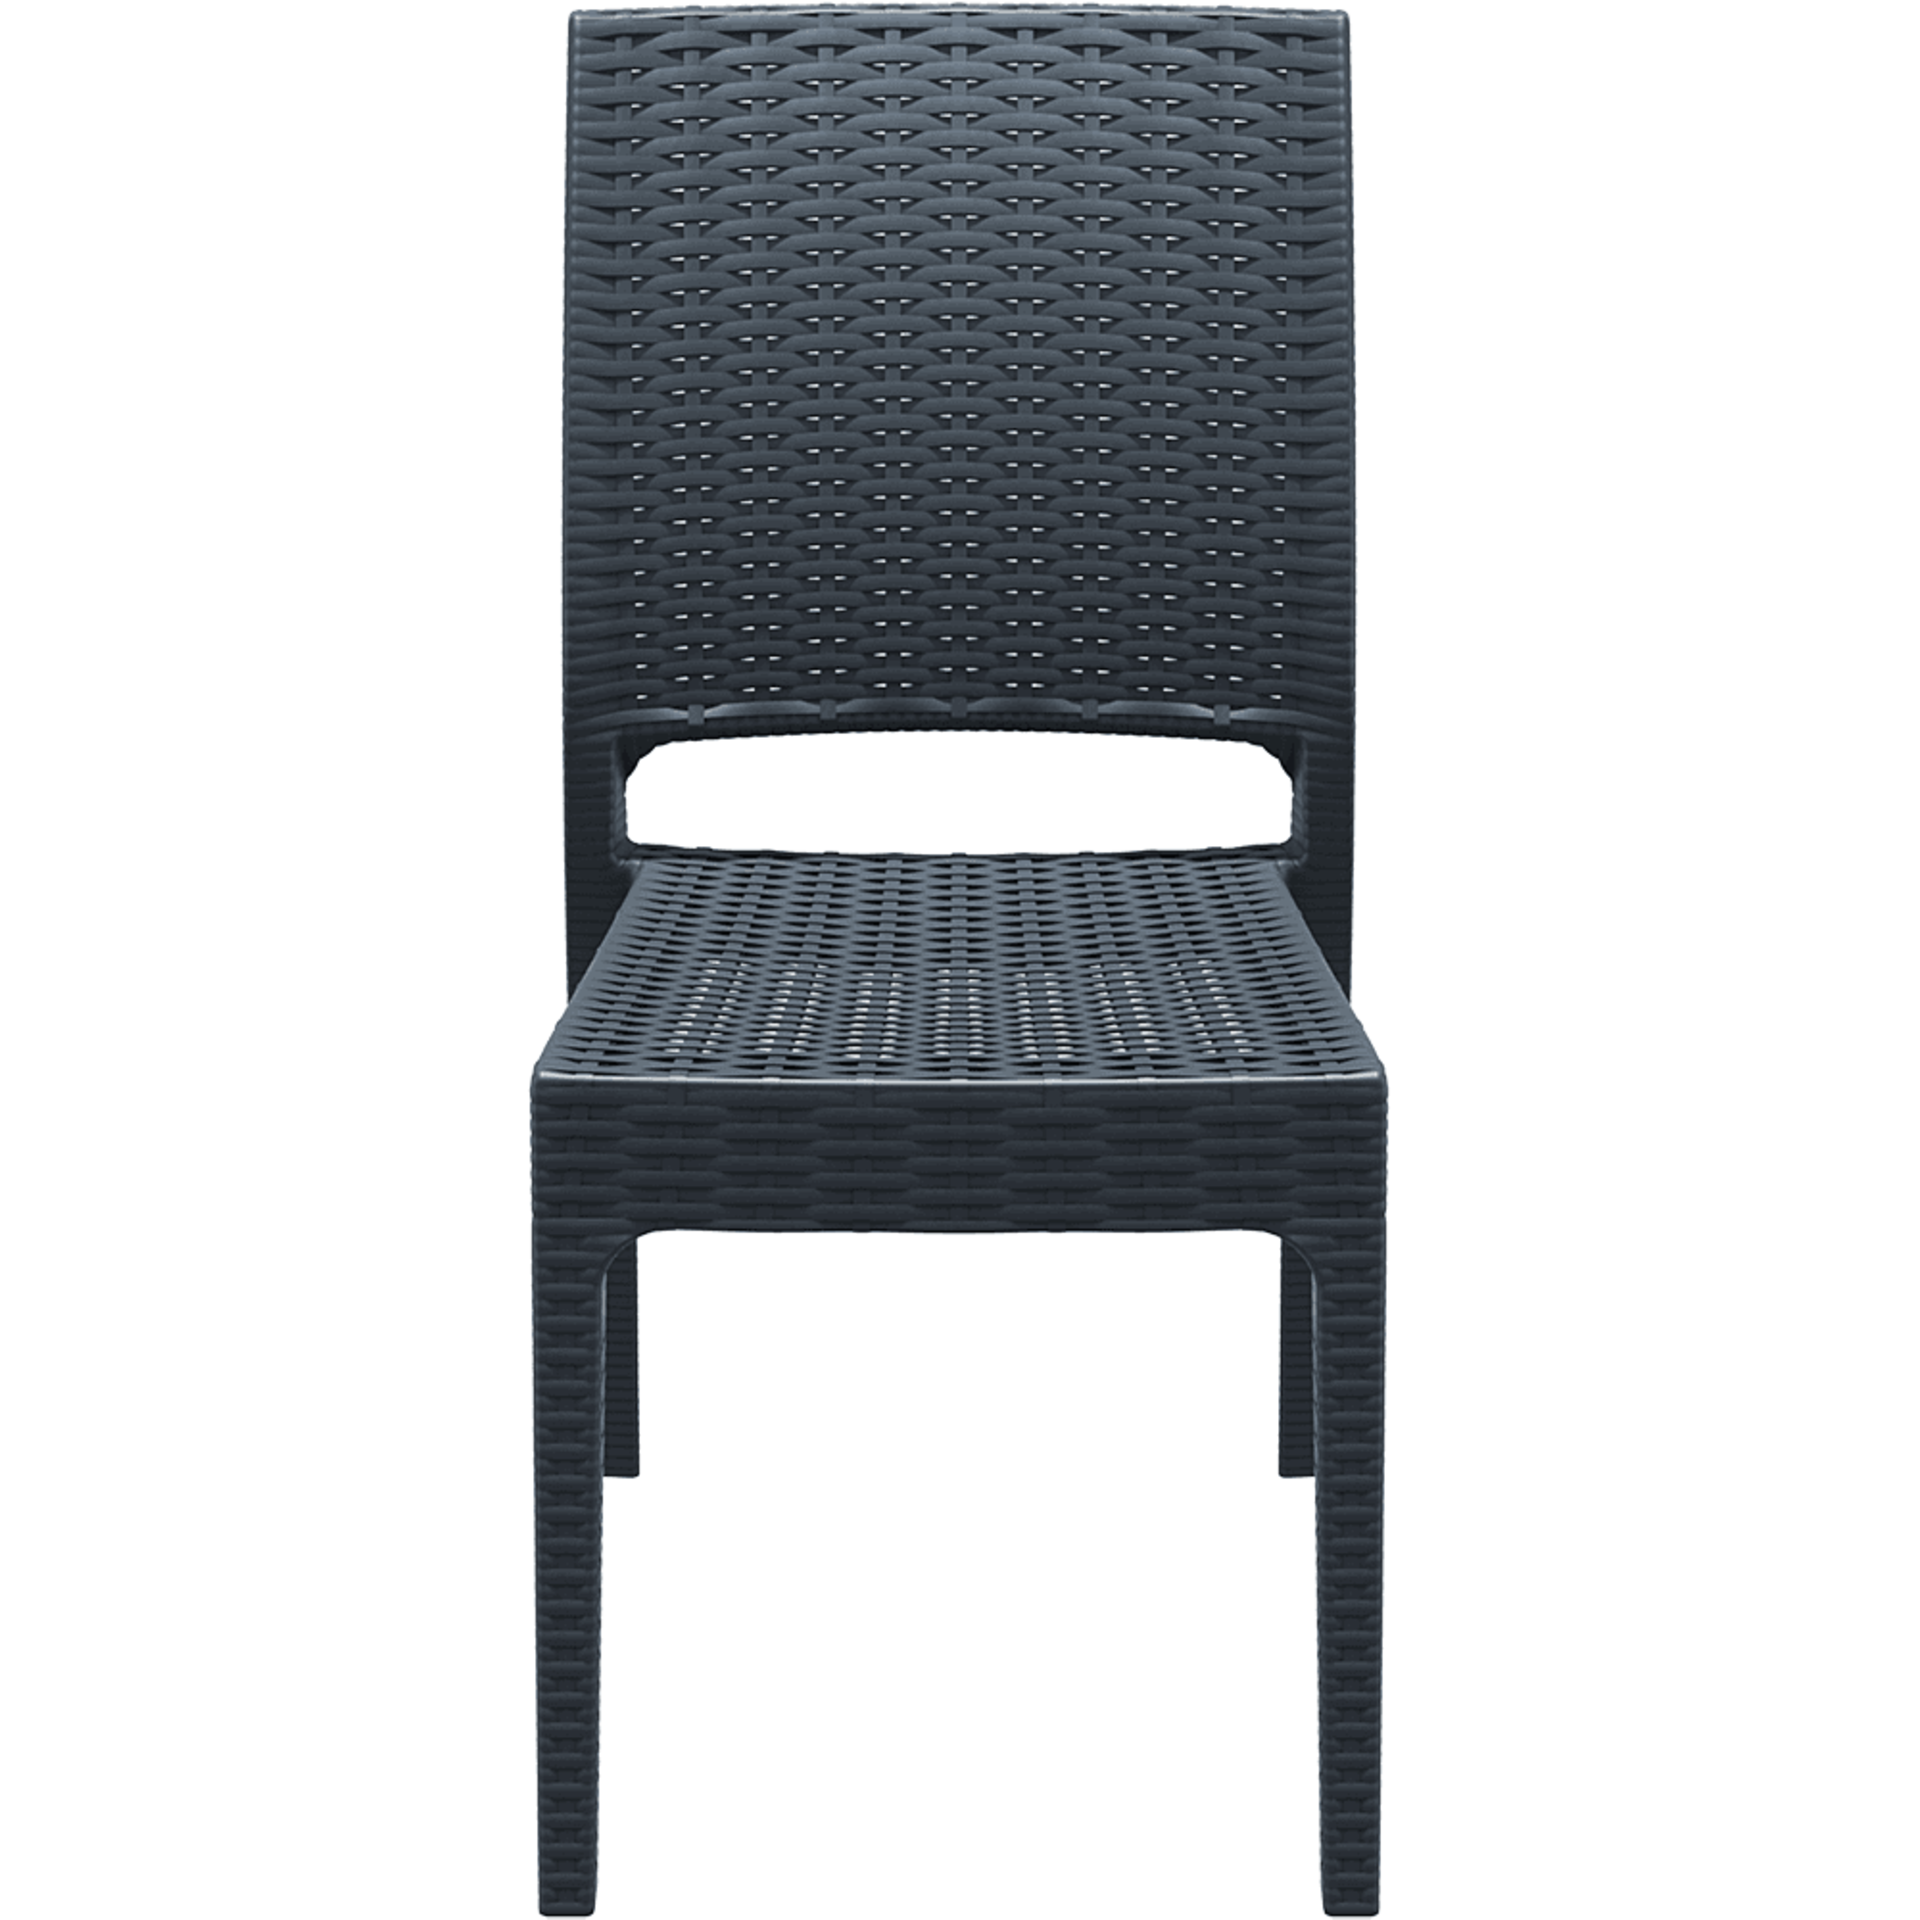 8 x Siesta 'Florida' Rattan Style Garden Chairs In Dark Grey - Suitable For Commercial or Home Use - - Image 20 of 21